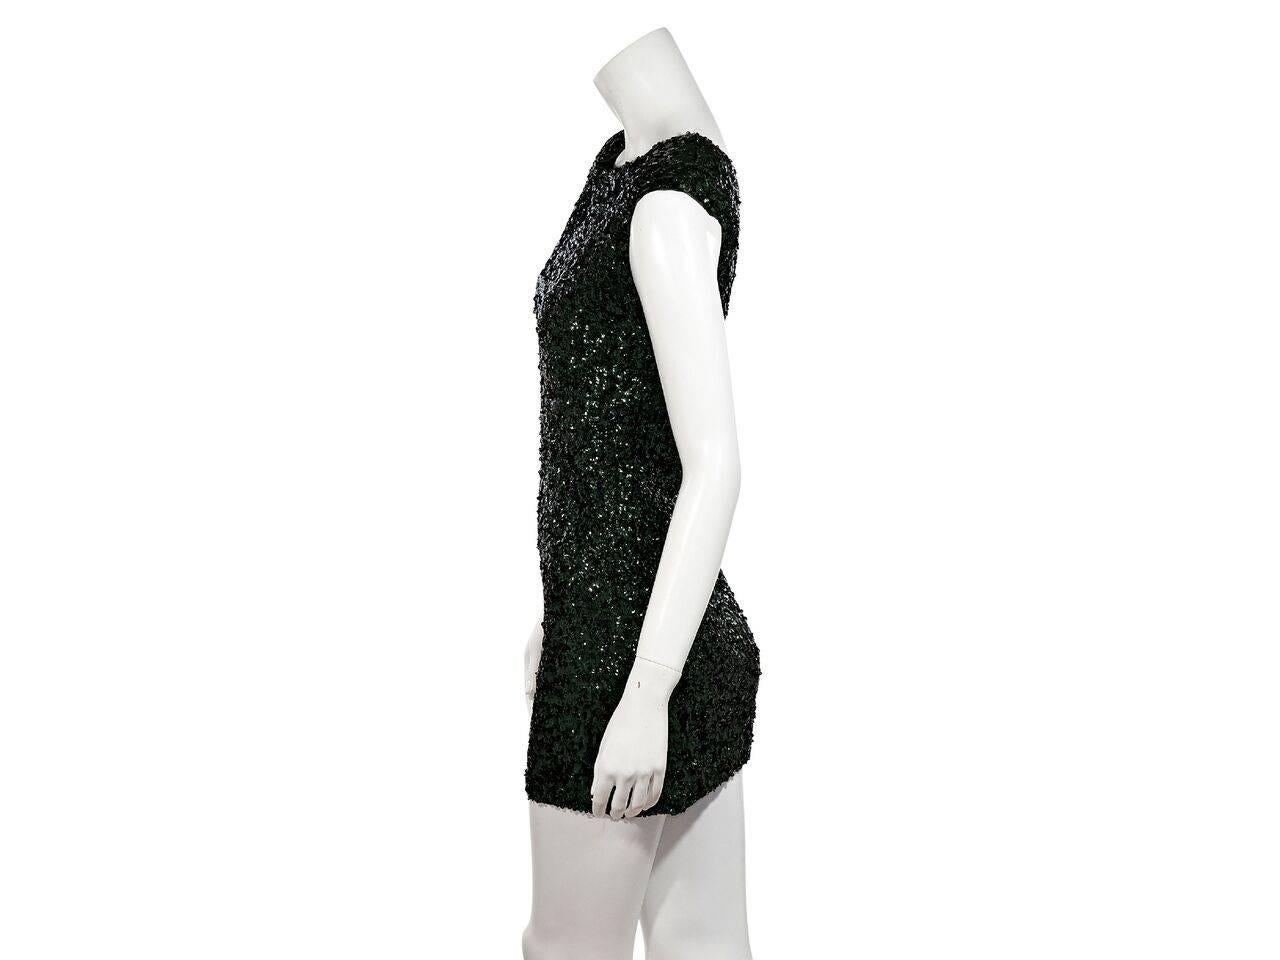 Product details:  Emerald green sequin mini dress by Alice + Olivia.  Boatneck.  Cap sleeves.  Button back closure with keyhole cutout.  
Condition: Pre-owned. Very good.
Est. Retail $ 448.00